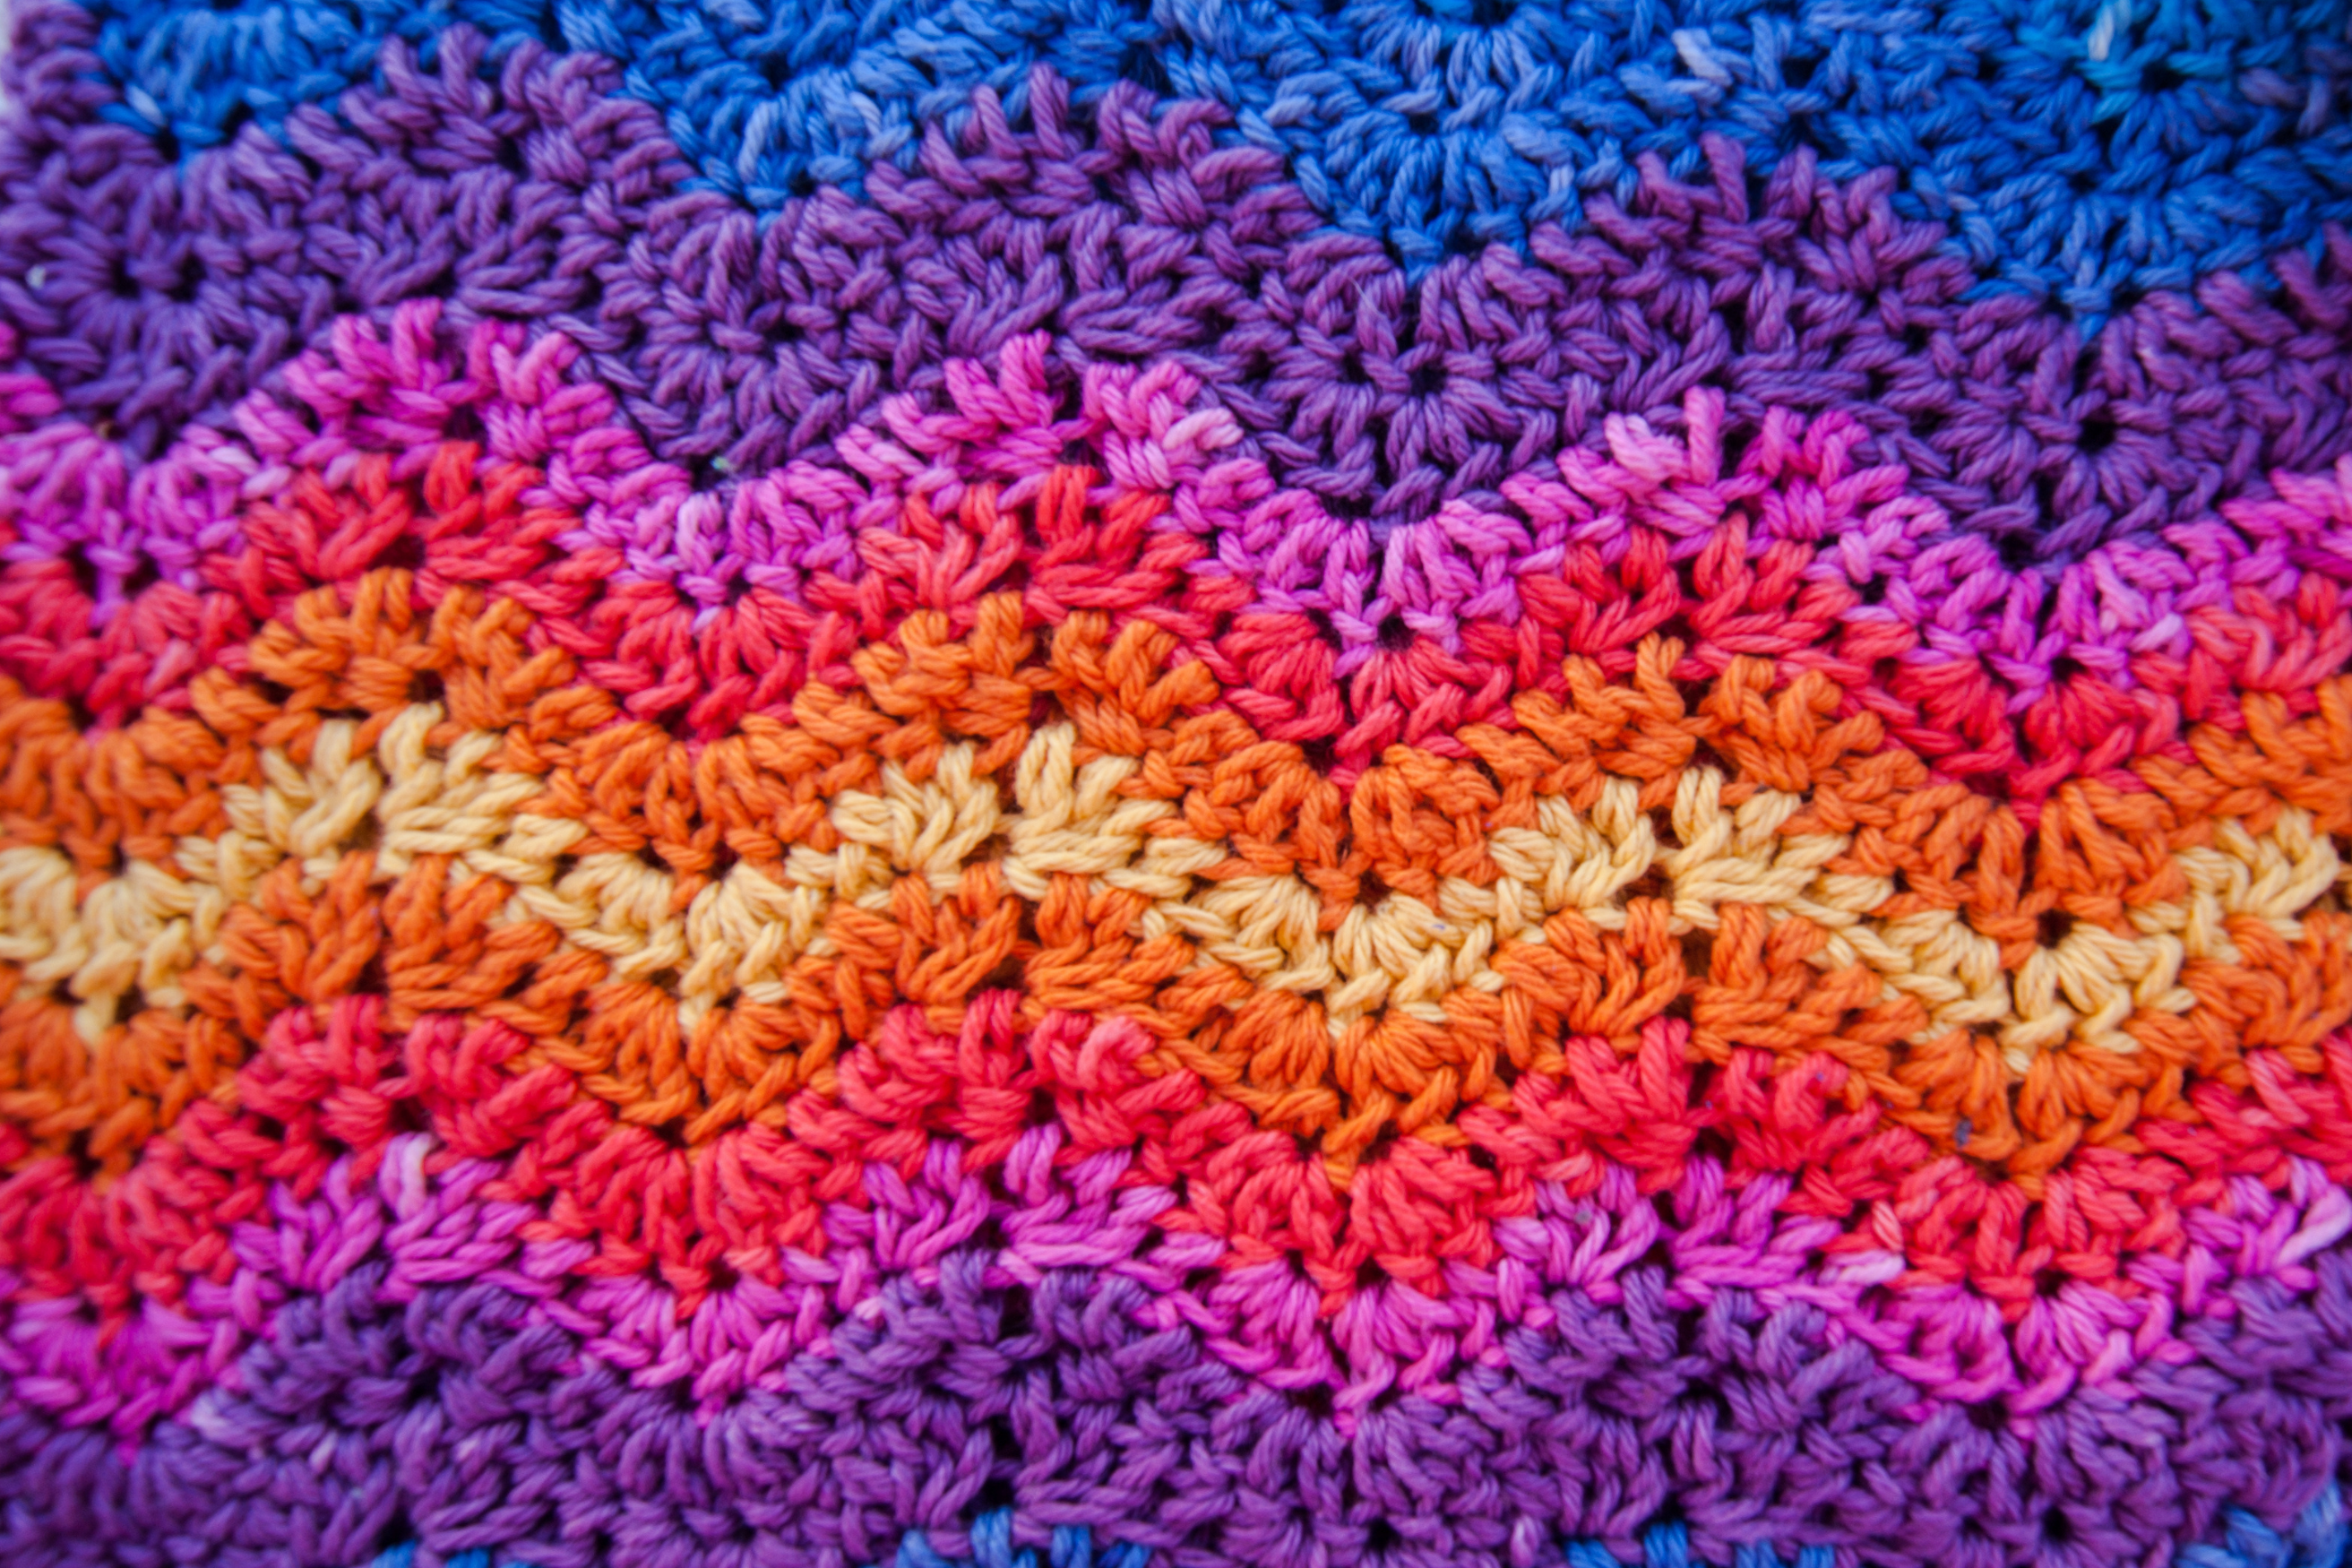 Can Crochet Be Dyed? How to Dye Crochet Items